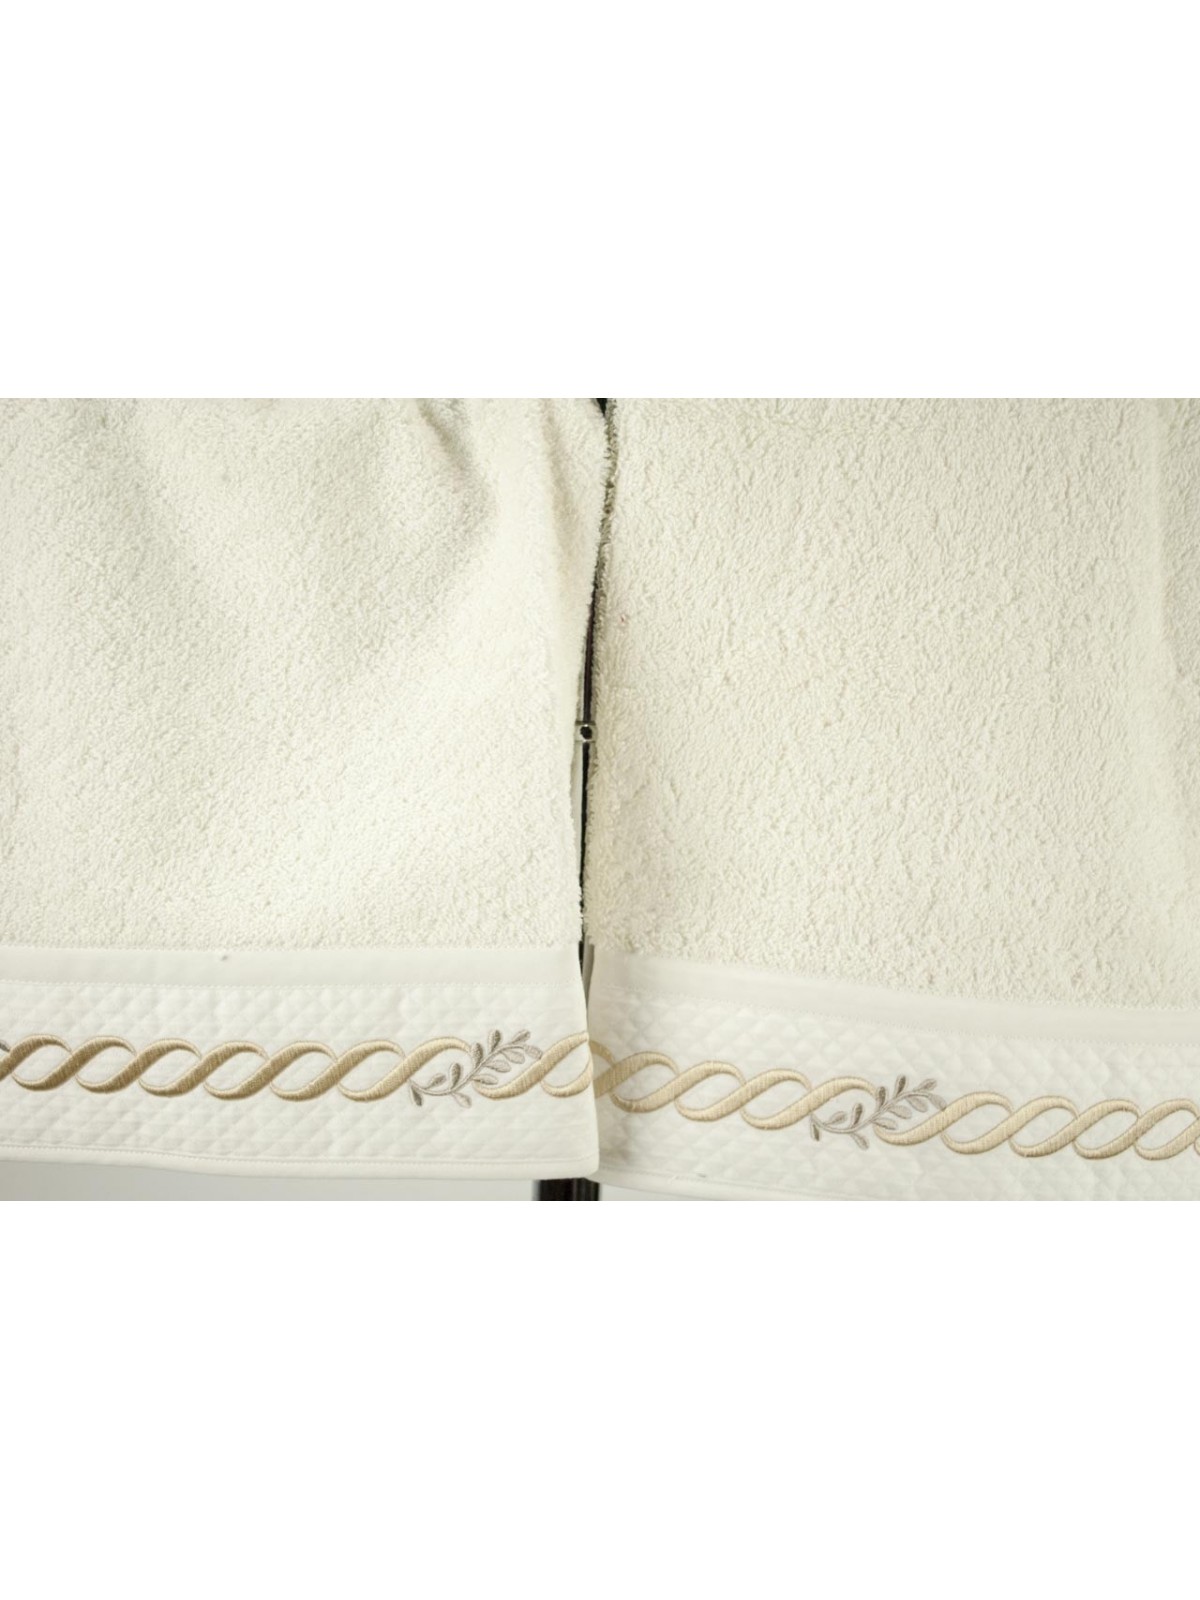 GIFT IDEA Towels Face + Guest Embroidery Chain Wave Ivory Beige 7820